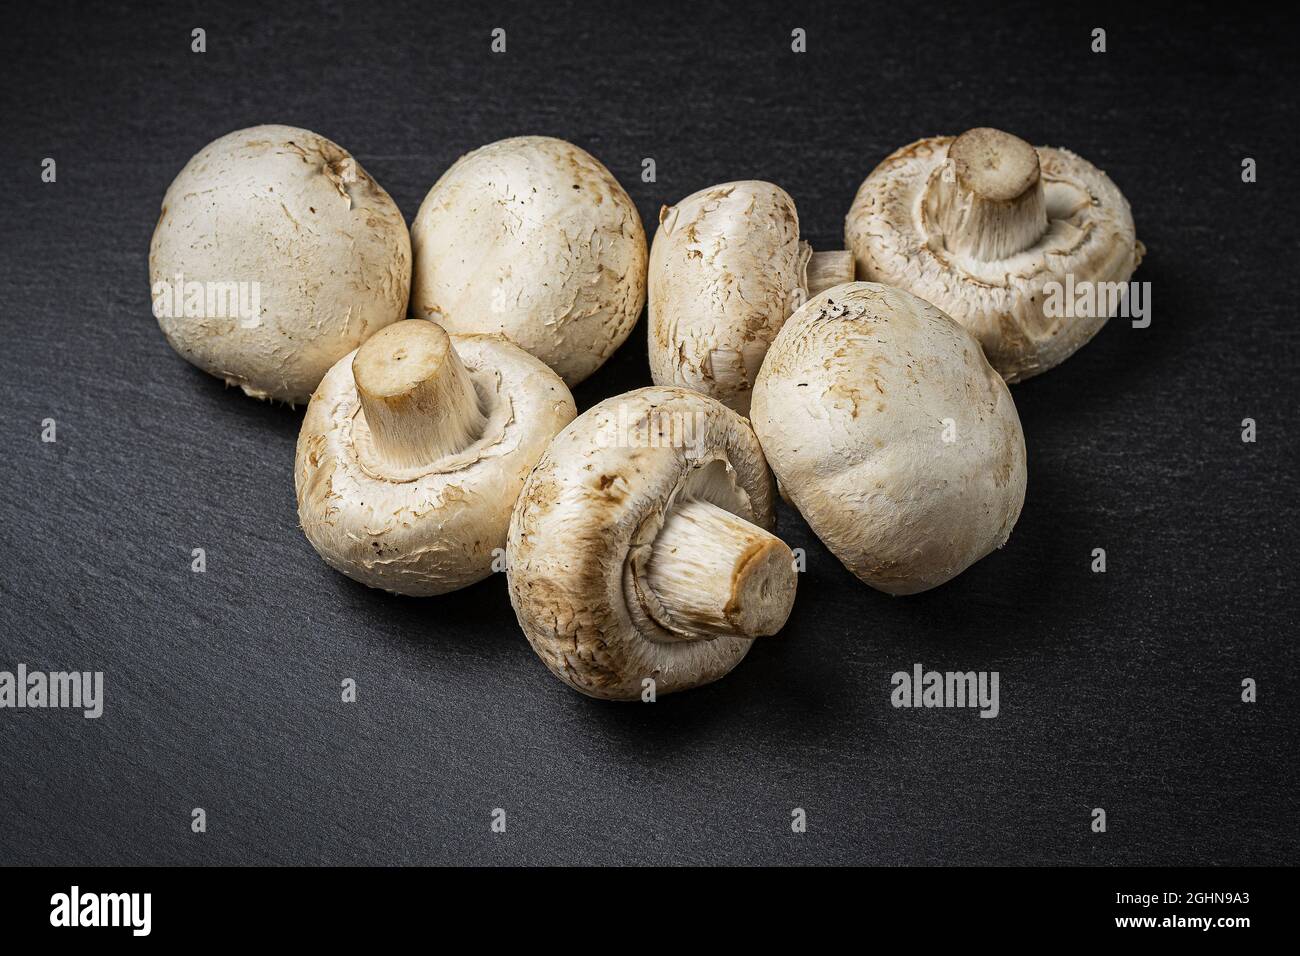 Closeup view of whole champignon mushrooms isolated on a black background Stock Photo